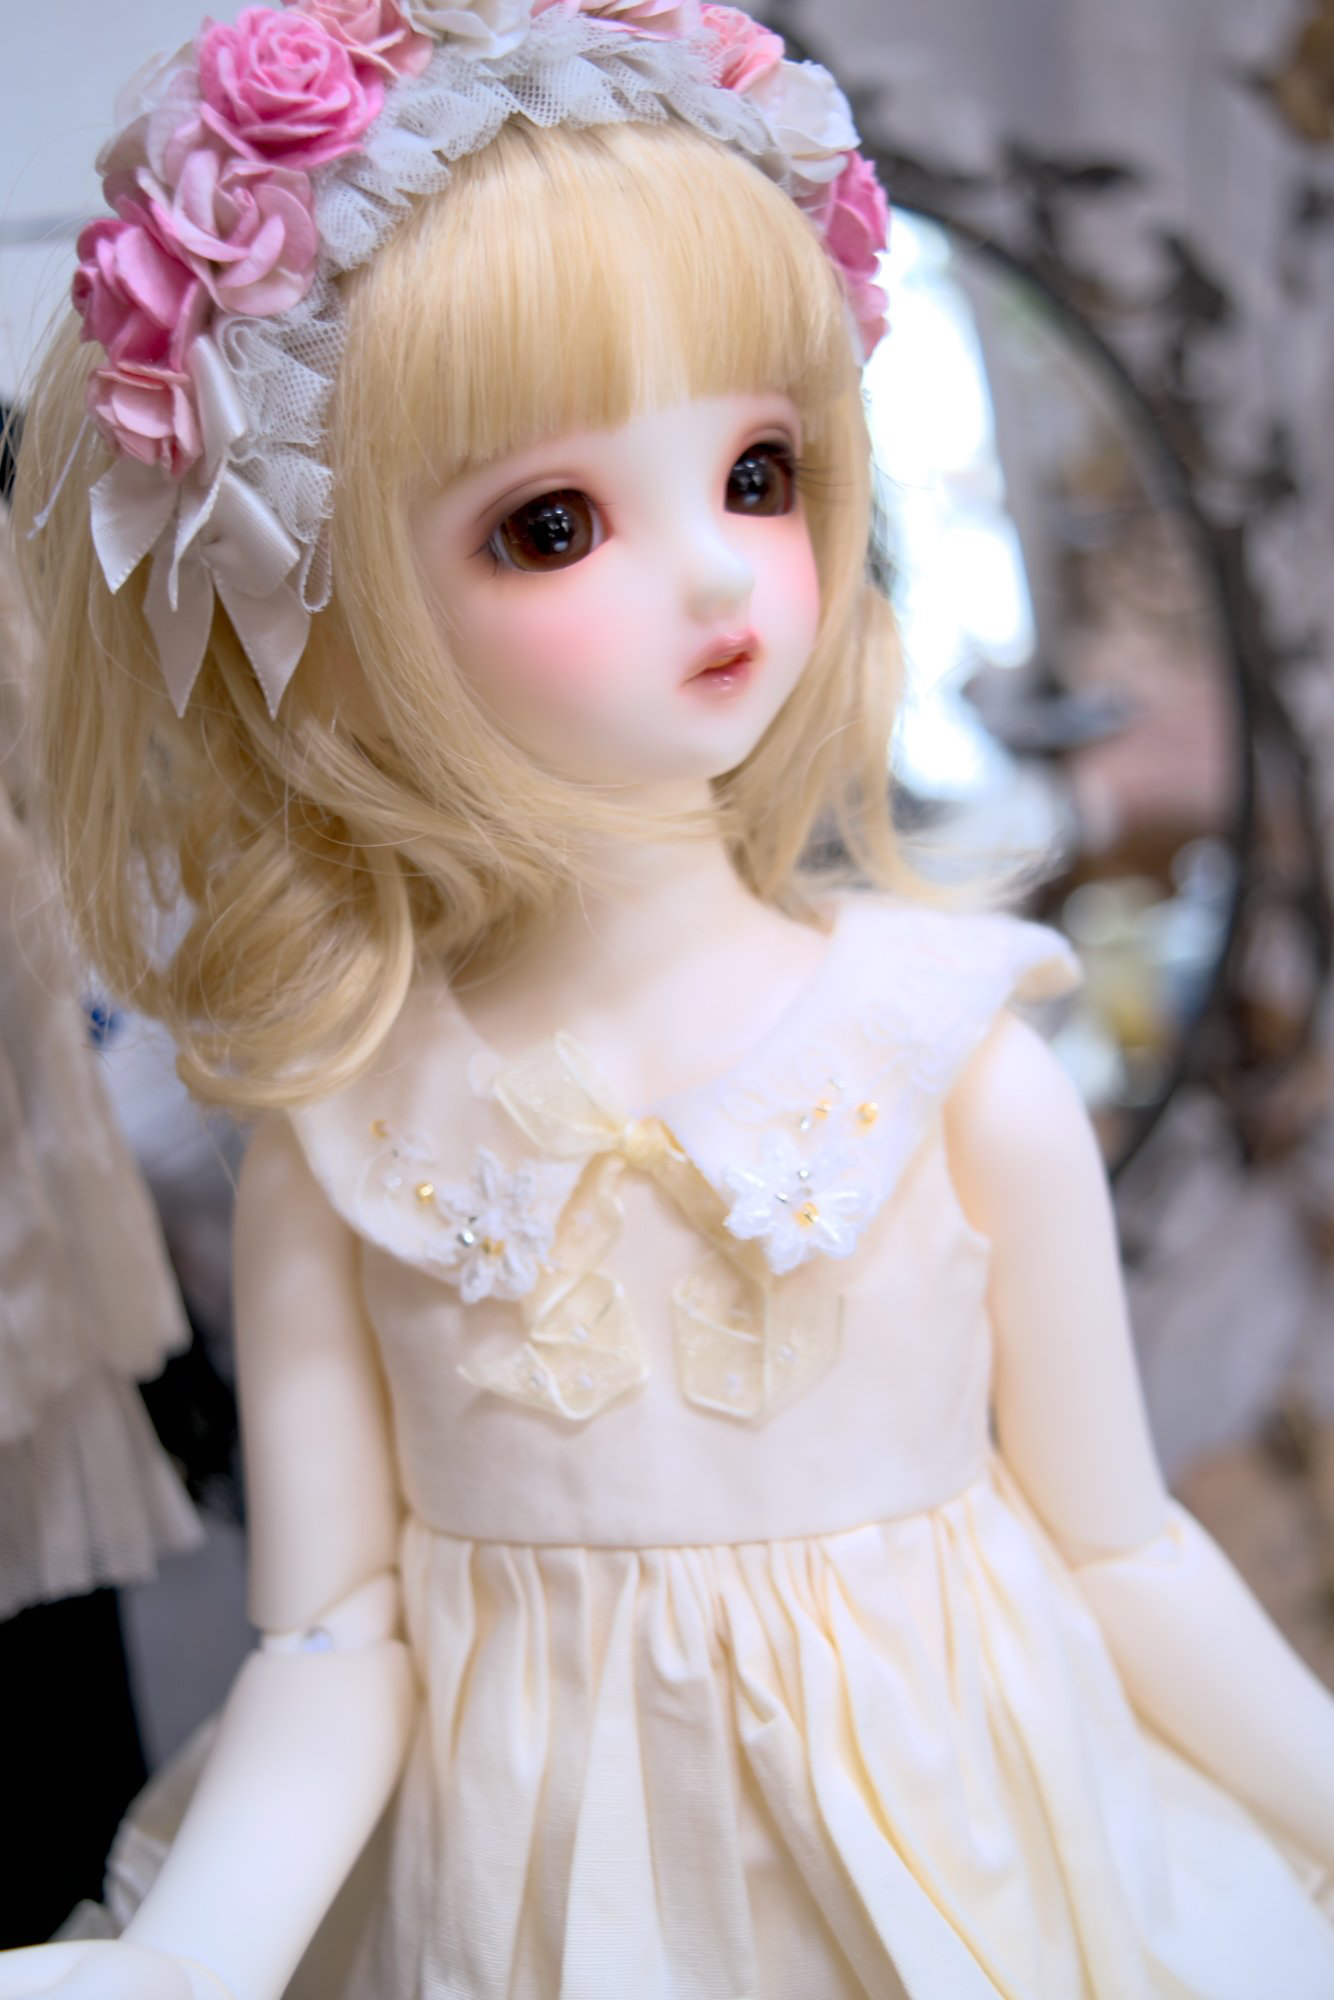 Photos Of Dolls For DP